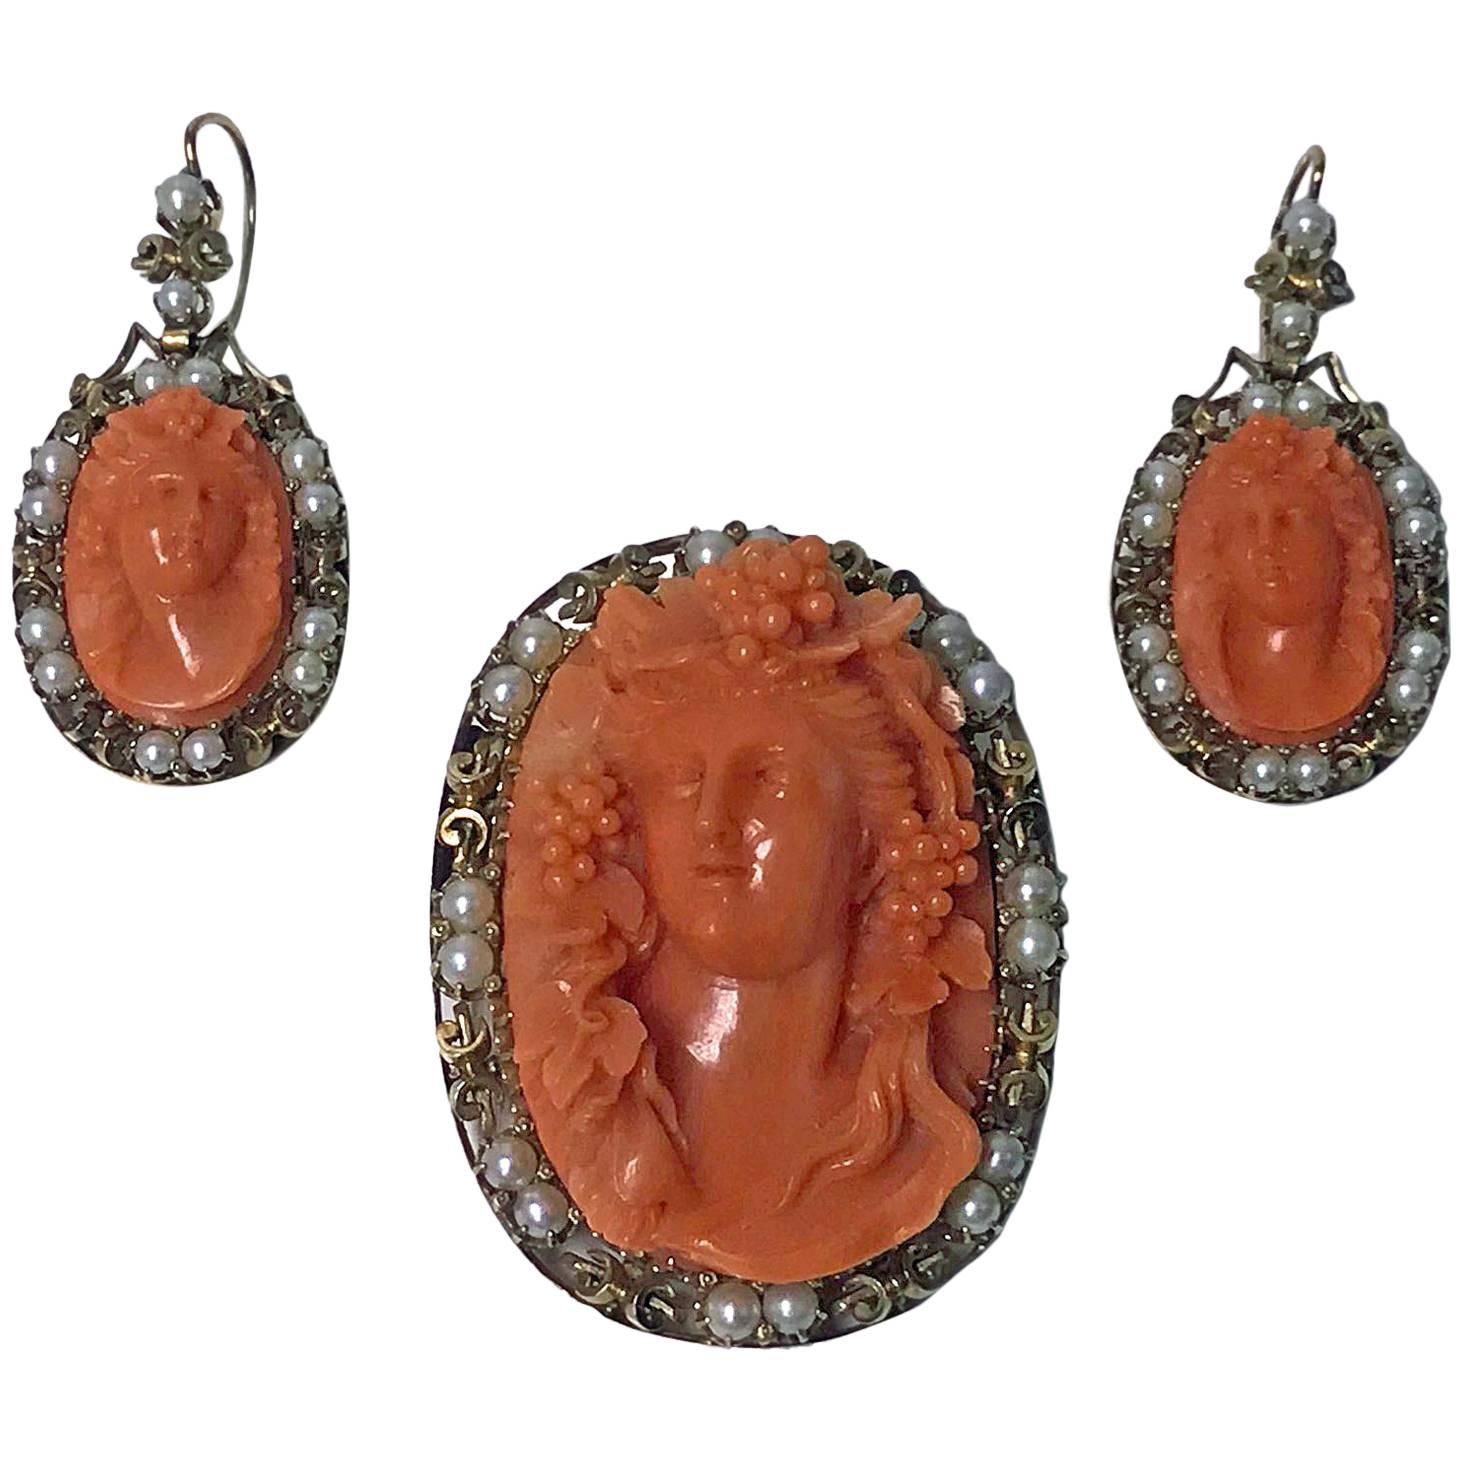 Very rare and fine 19th century oval Coral Corallium Rubrum Pendant Brooch and matching Earrings, C.1880. The set depicting carved Bacchante. The intricately carved openwork gold (tested as 14K) mounts each interspaced with fourteen silver white